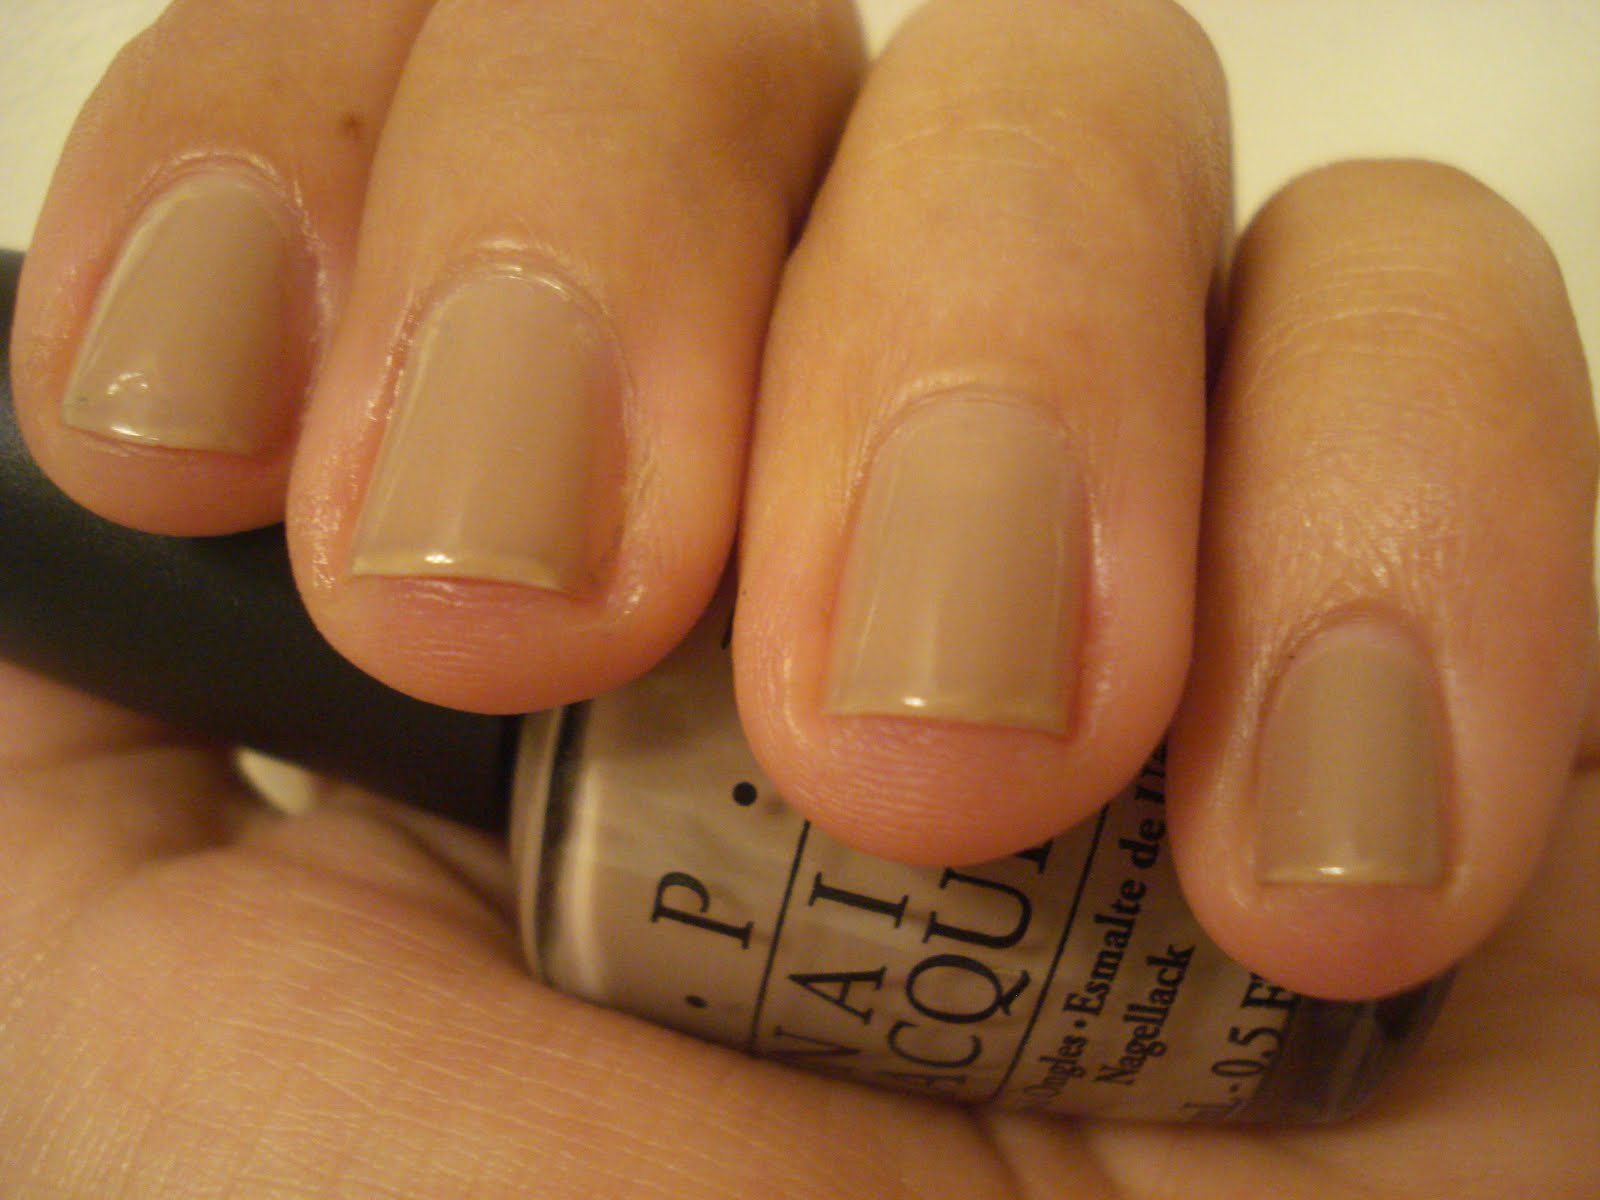 1. OPI "Tickle My France-y" - wide 6